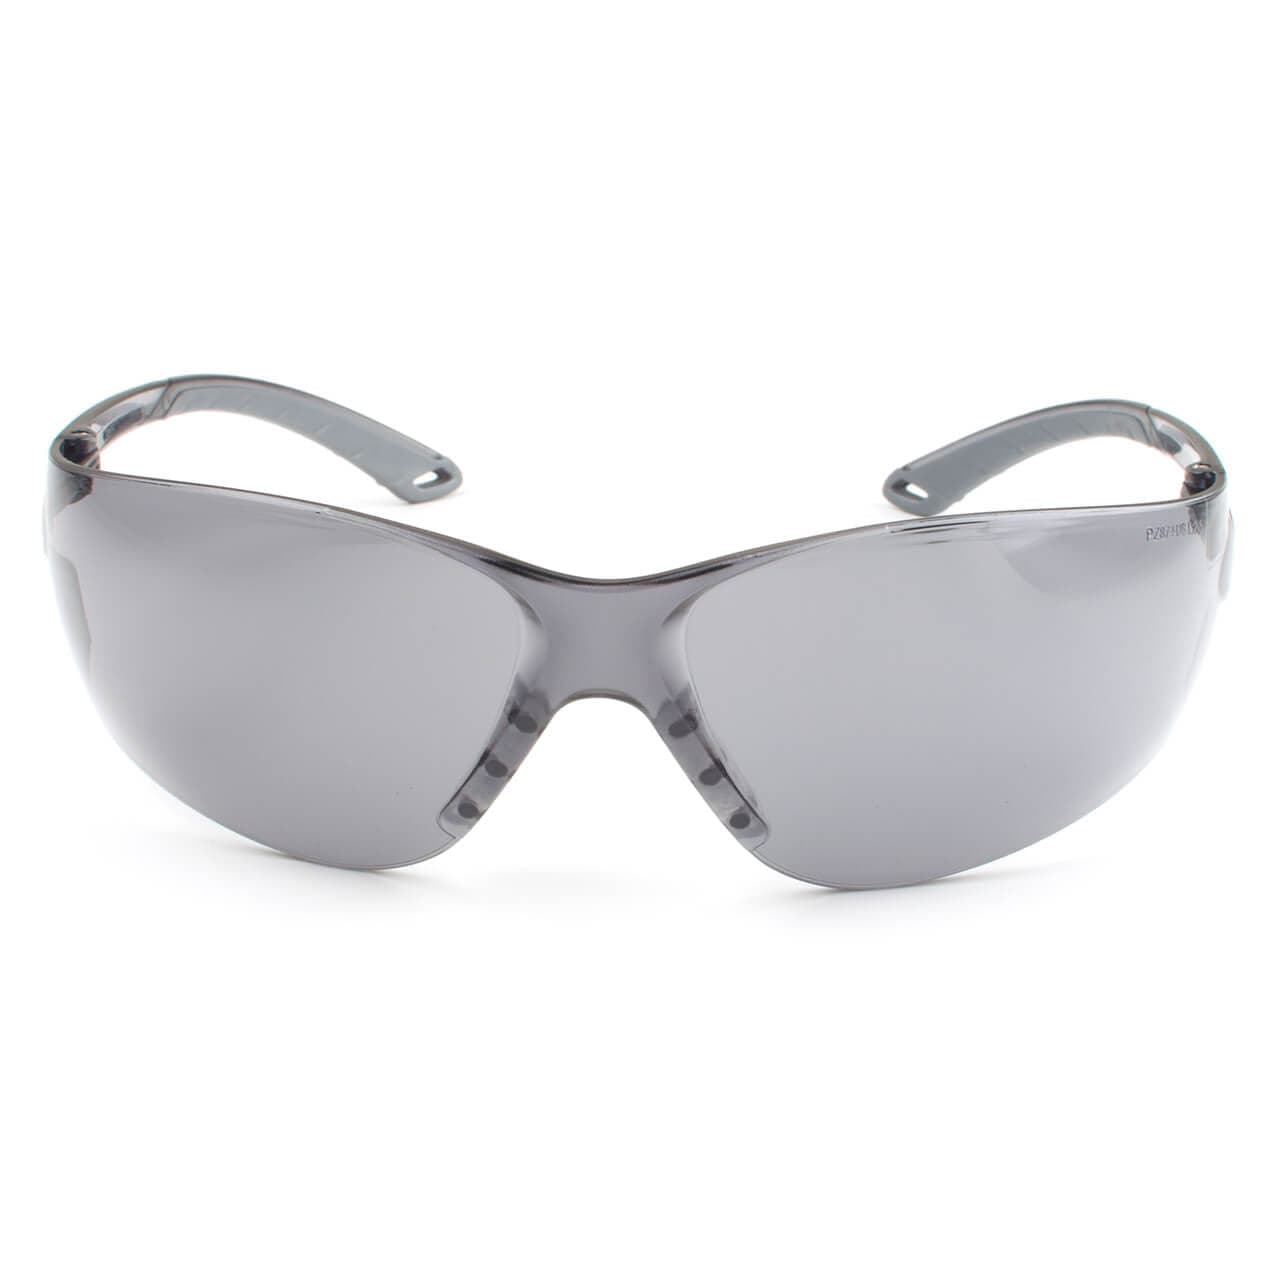 Metel M20 Safety Glasses with Gray Anti-Fog Lenses Front View